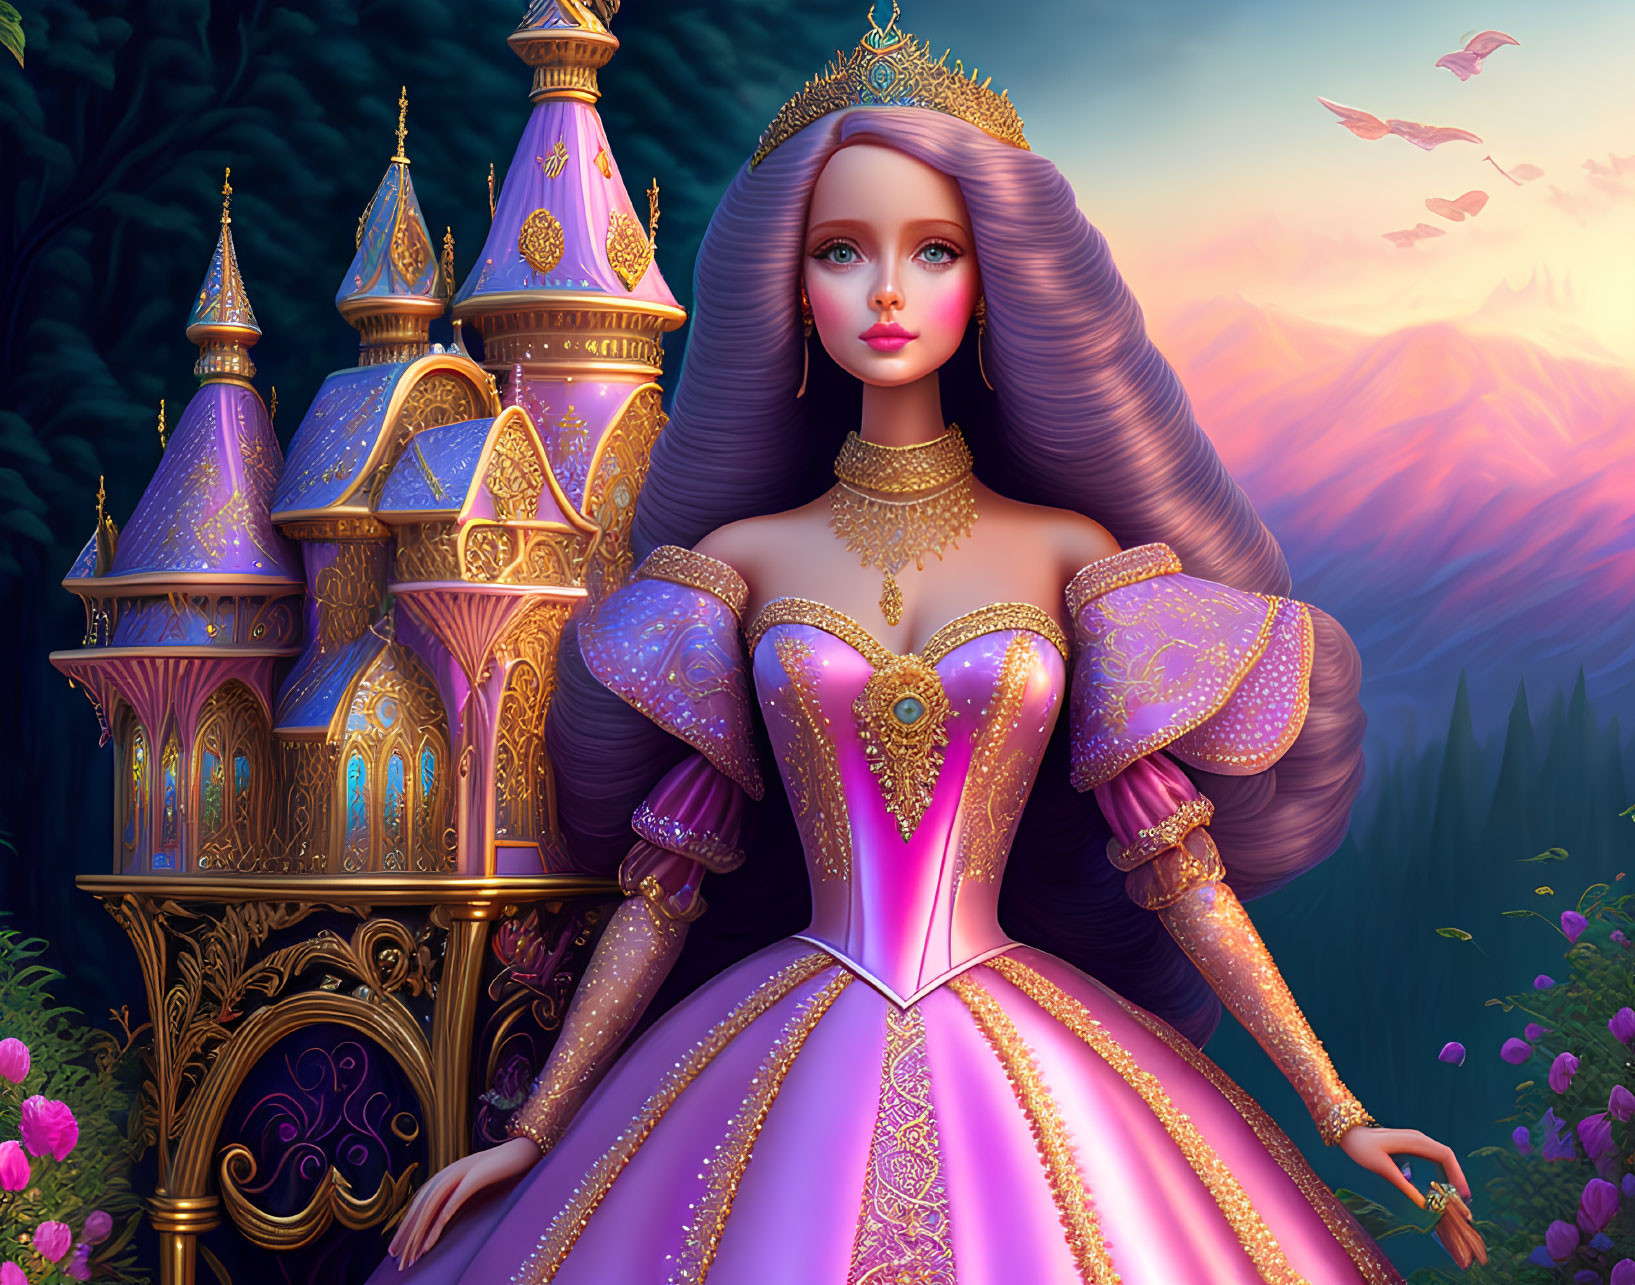 Princess in Pink Gown at Twilight Castle with Birds